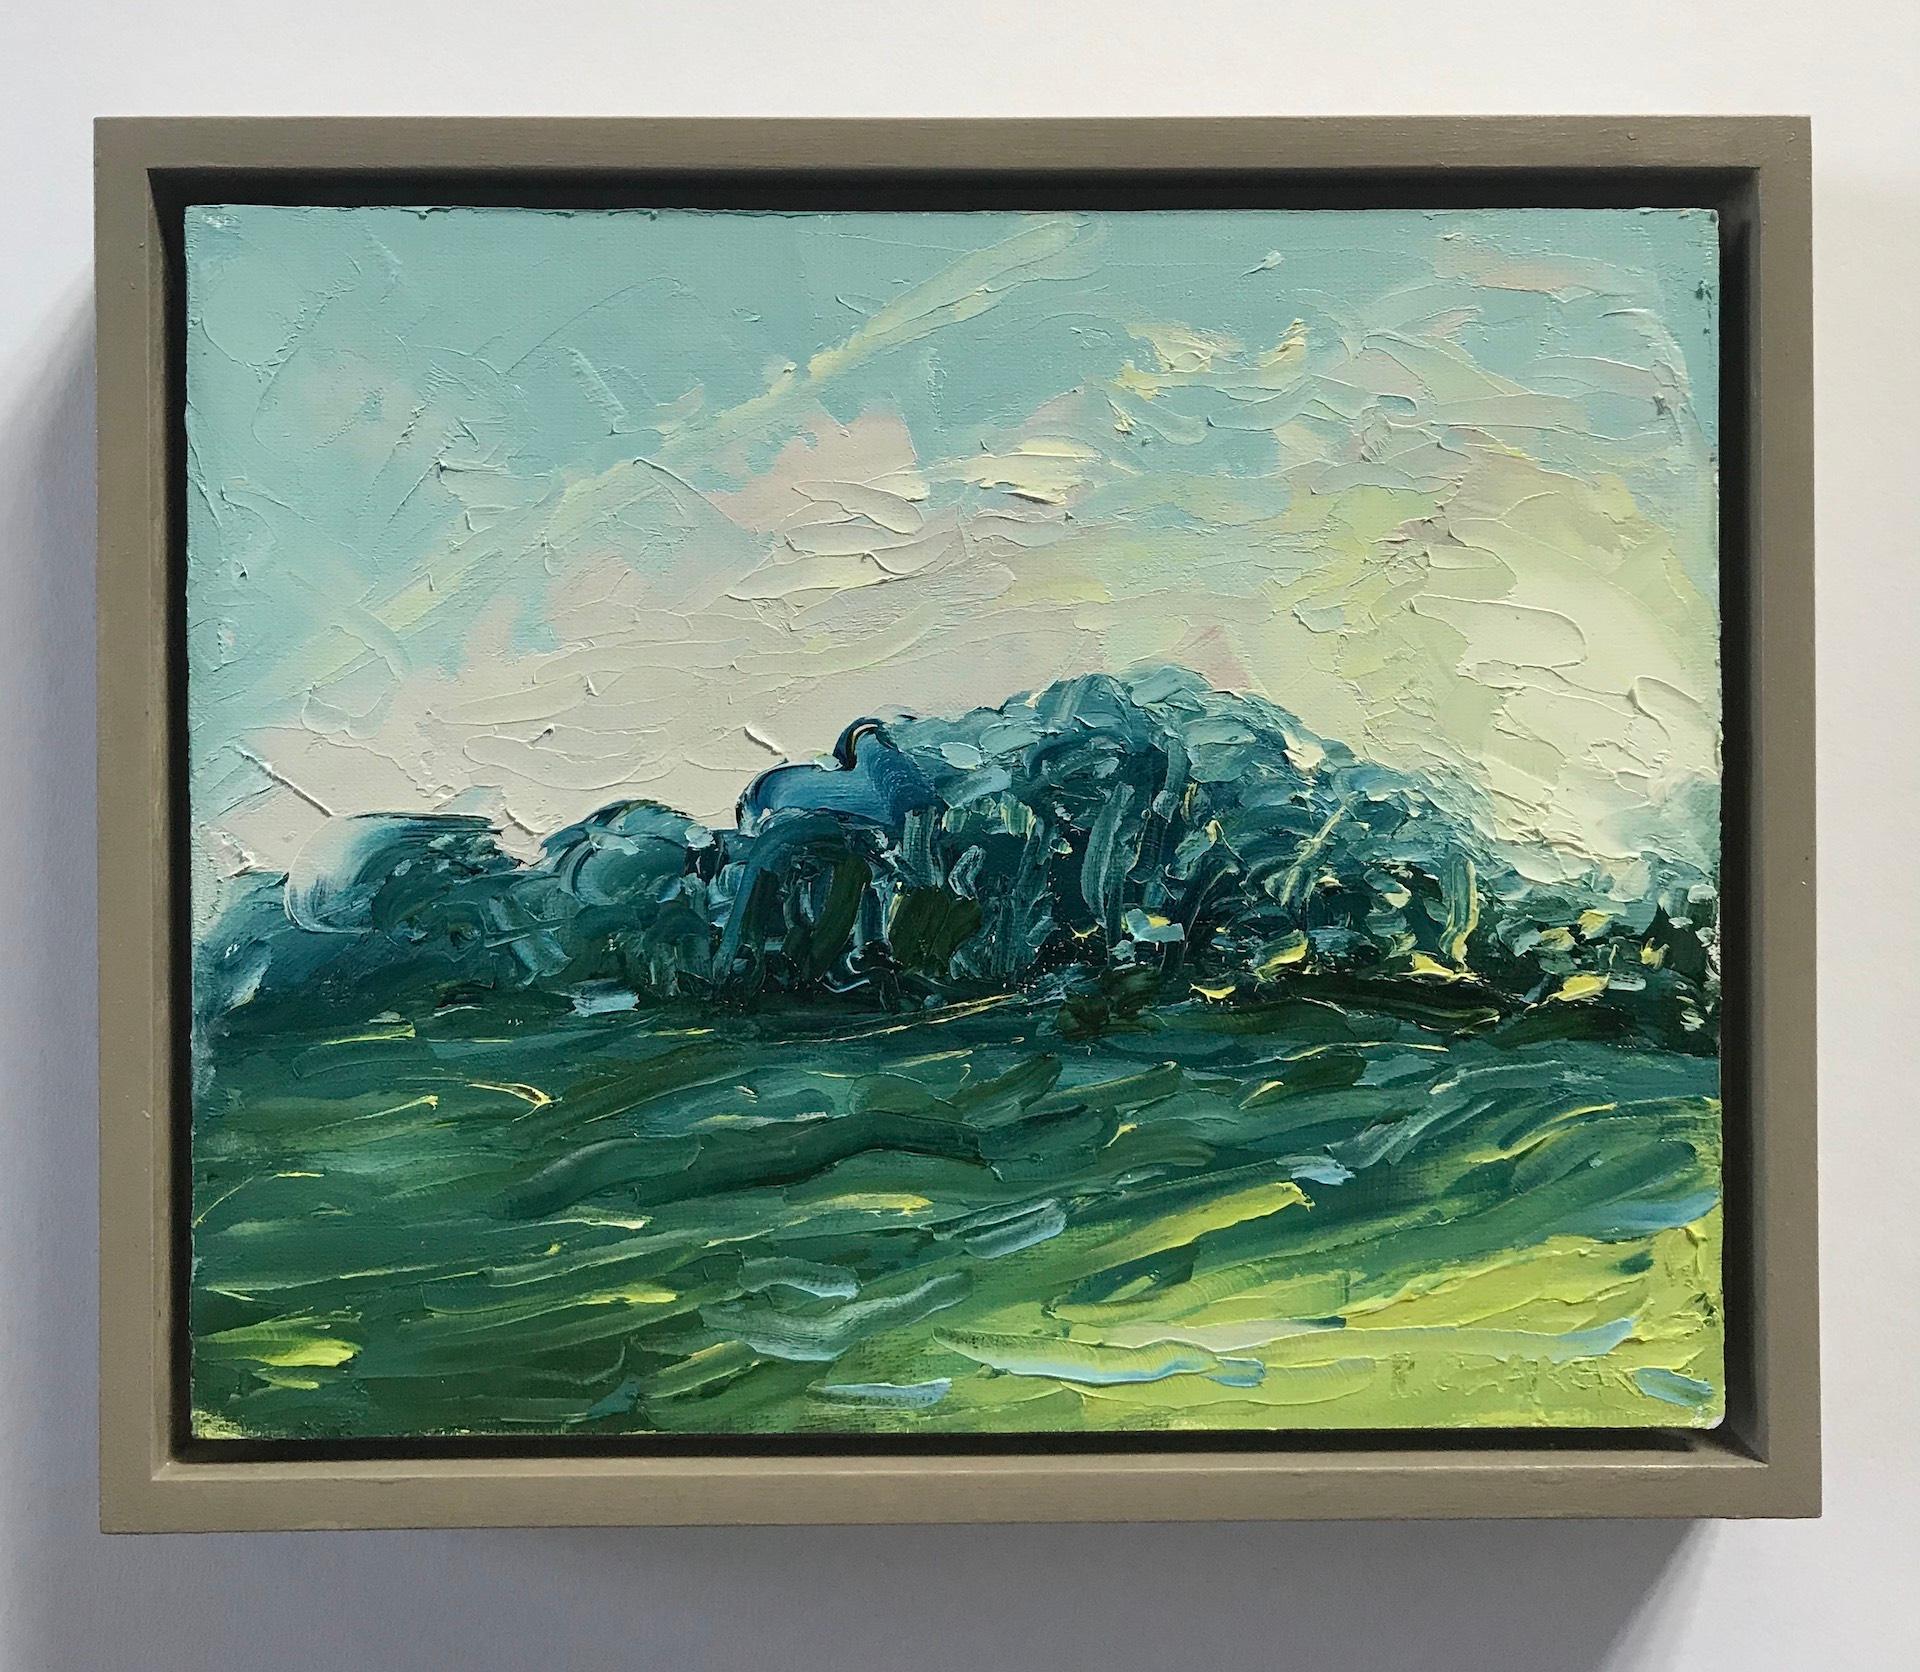 Rupert Aker
Ash Trees, Sunset
Original Painting
Oil on Canvas
Image Size: H 20cm x W 25cm
Framed Size: H 25cm x W 30cm
Signed
Sold Framed
Please note that in situ images are purely an indication of how a piece may look.

Ash Trees, Sunset is an